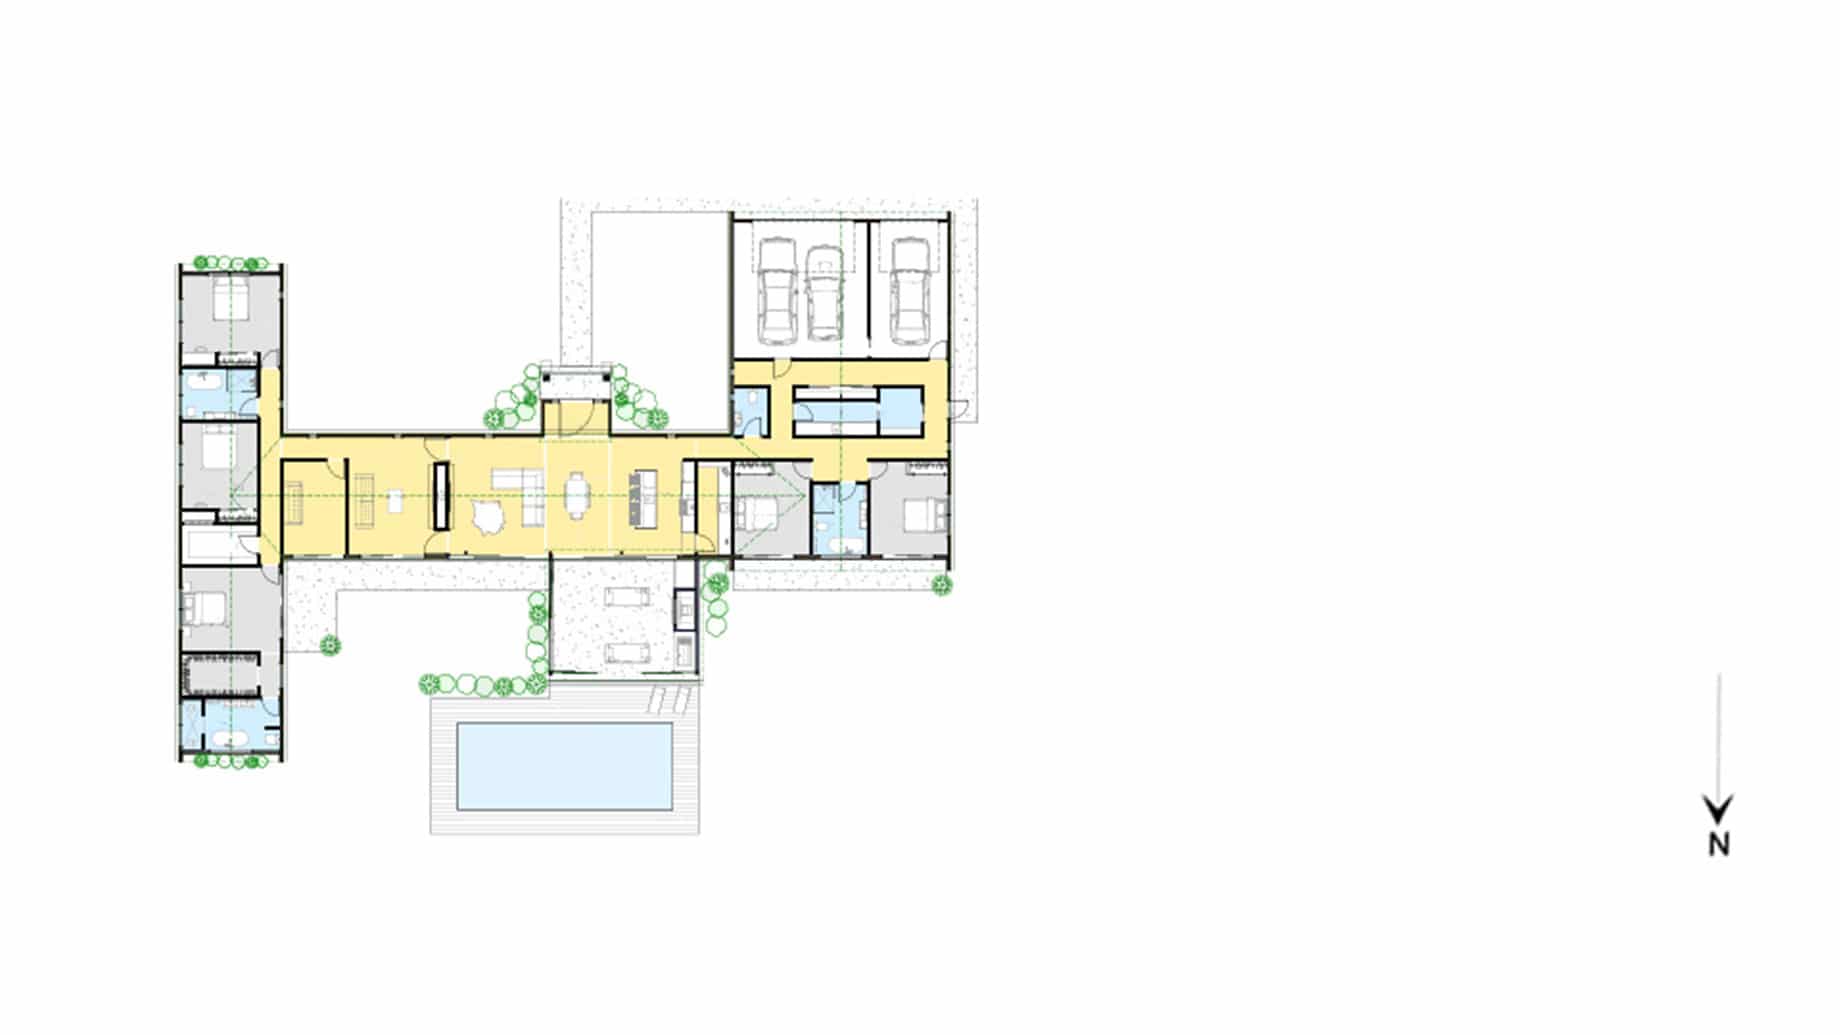 Floor plan for 16050. This home has a wide living space with lots of natural light coming through into the home. The floor area is 434.53 m2. The home has a feature entry. There are three bedrooms and a study room. There is also a seperate media room. There is open plan living, dining, and kitchen area with scullery to kitchen. There are 3x double garages to fit 6 cars or you can turn one of the garages into a workshop. The home has a two large decks at each side of the home, with a pool.